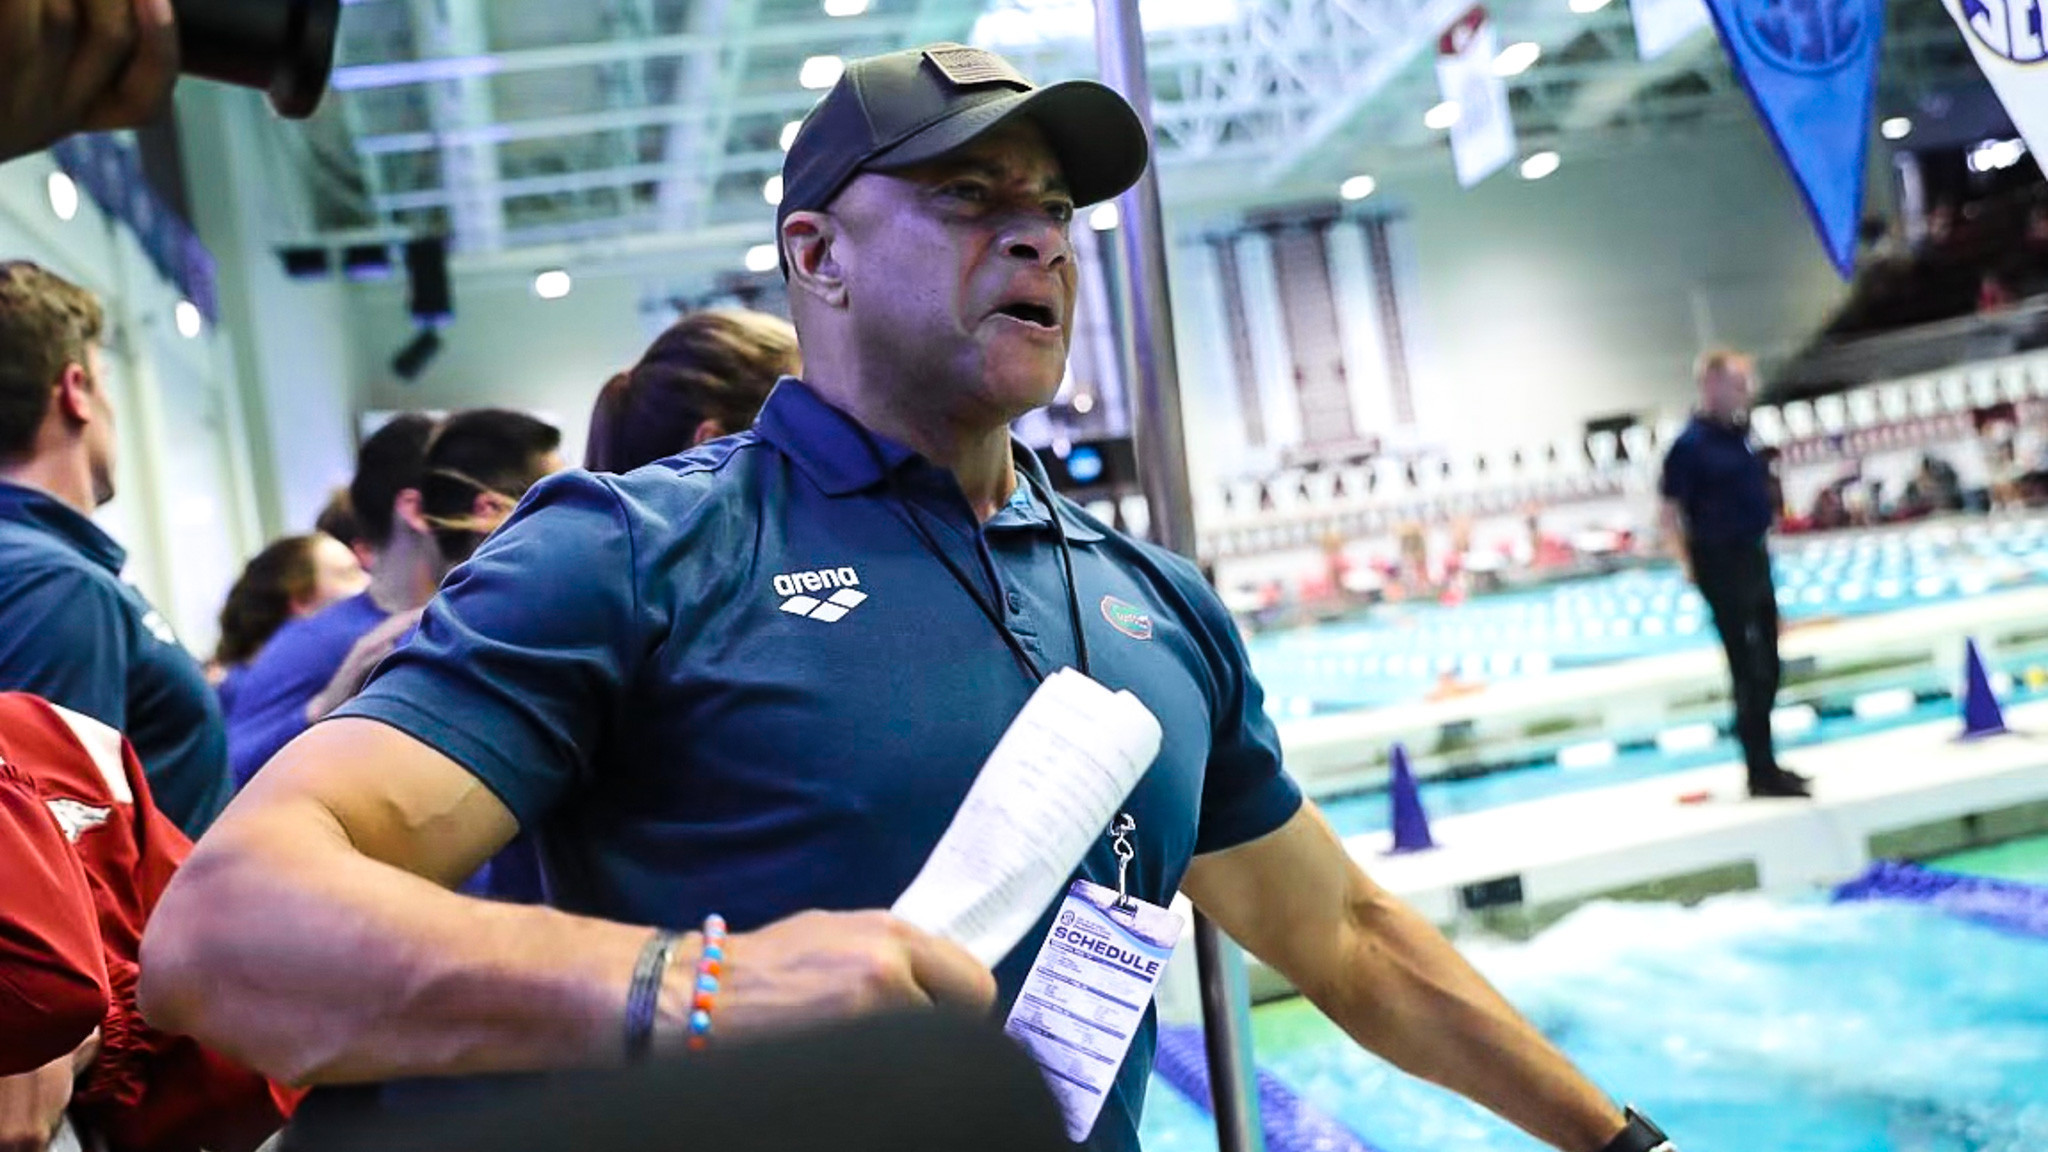 Nesty to make more history at Paris 2024 after appointed first black head coach of US Olympic swimming team 